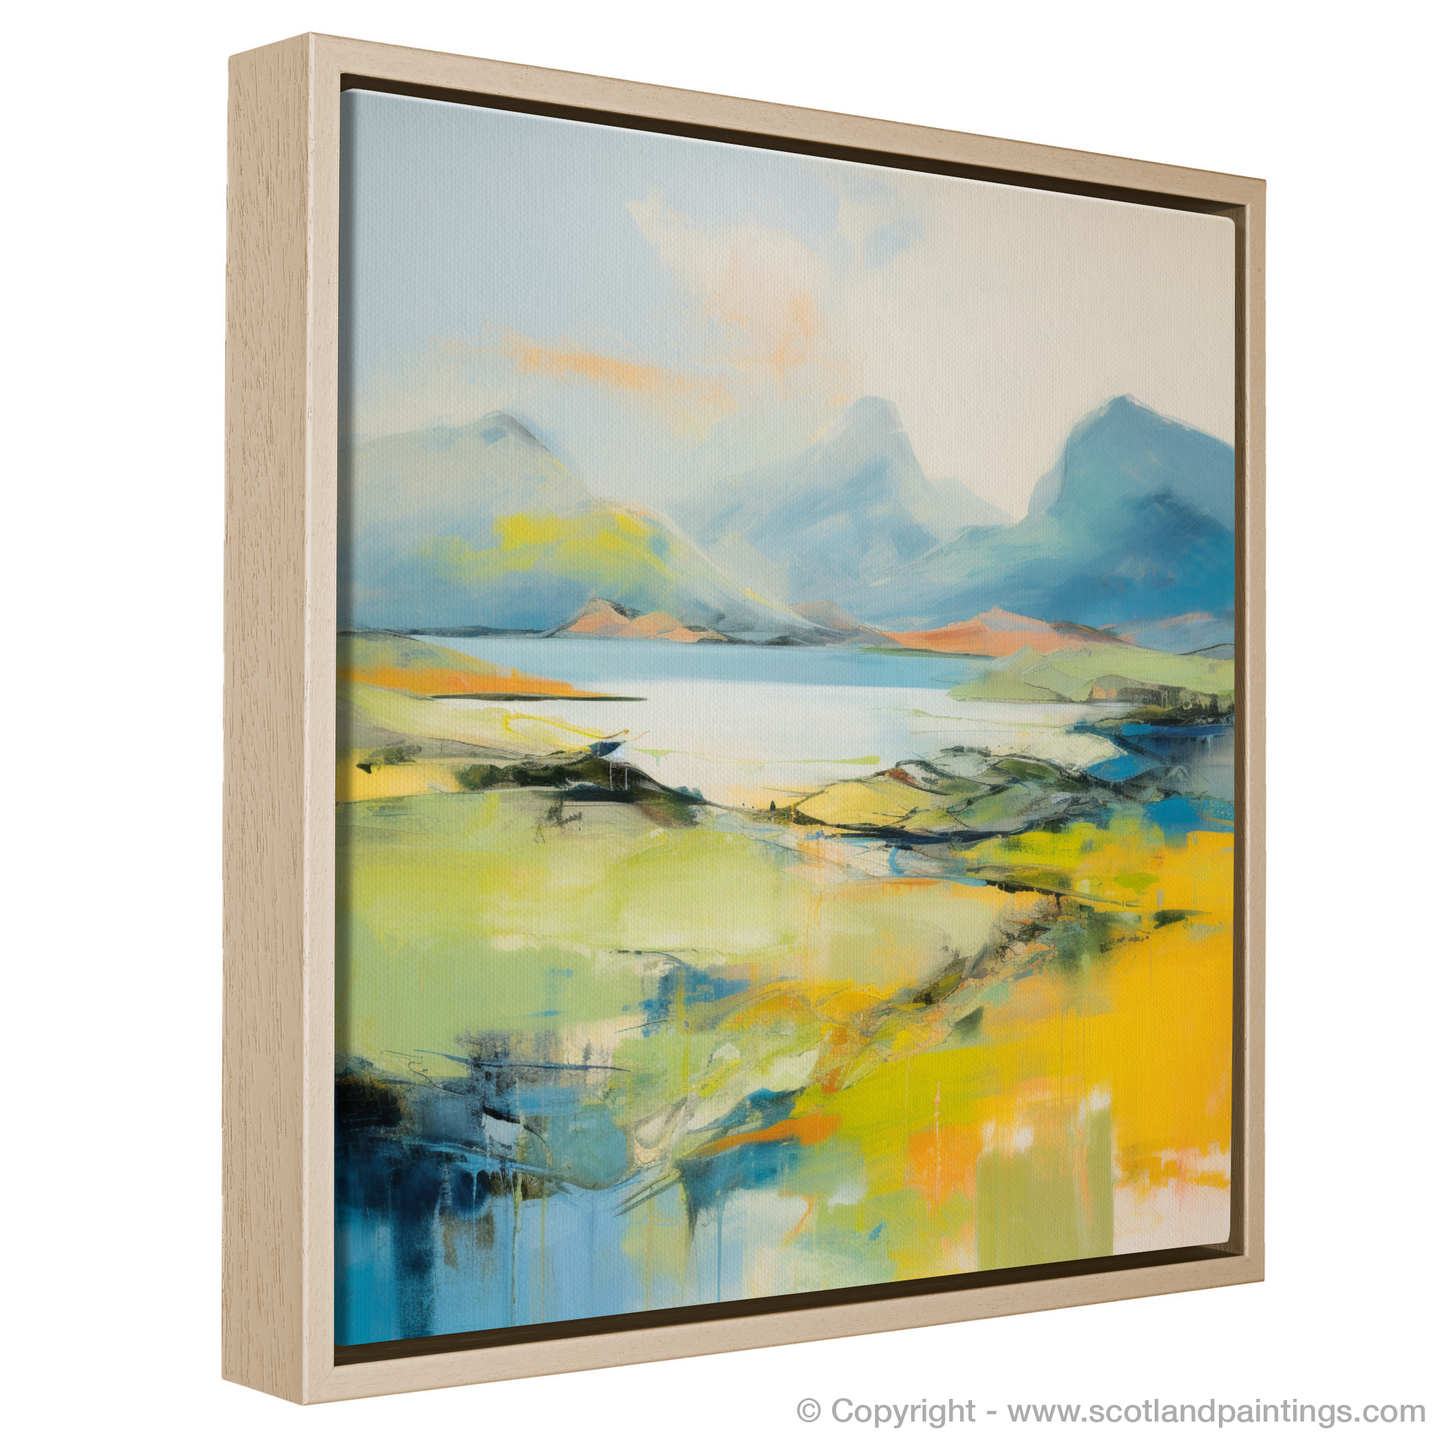 Painting and Art Print of Isle of Raasay, Inner Hebrides in summer entitled "Abstract Symphony of Raasay Summer".